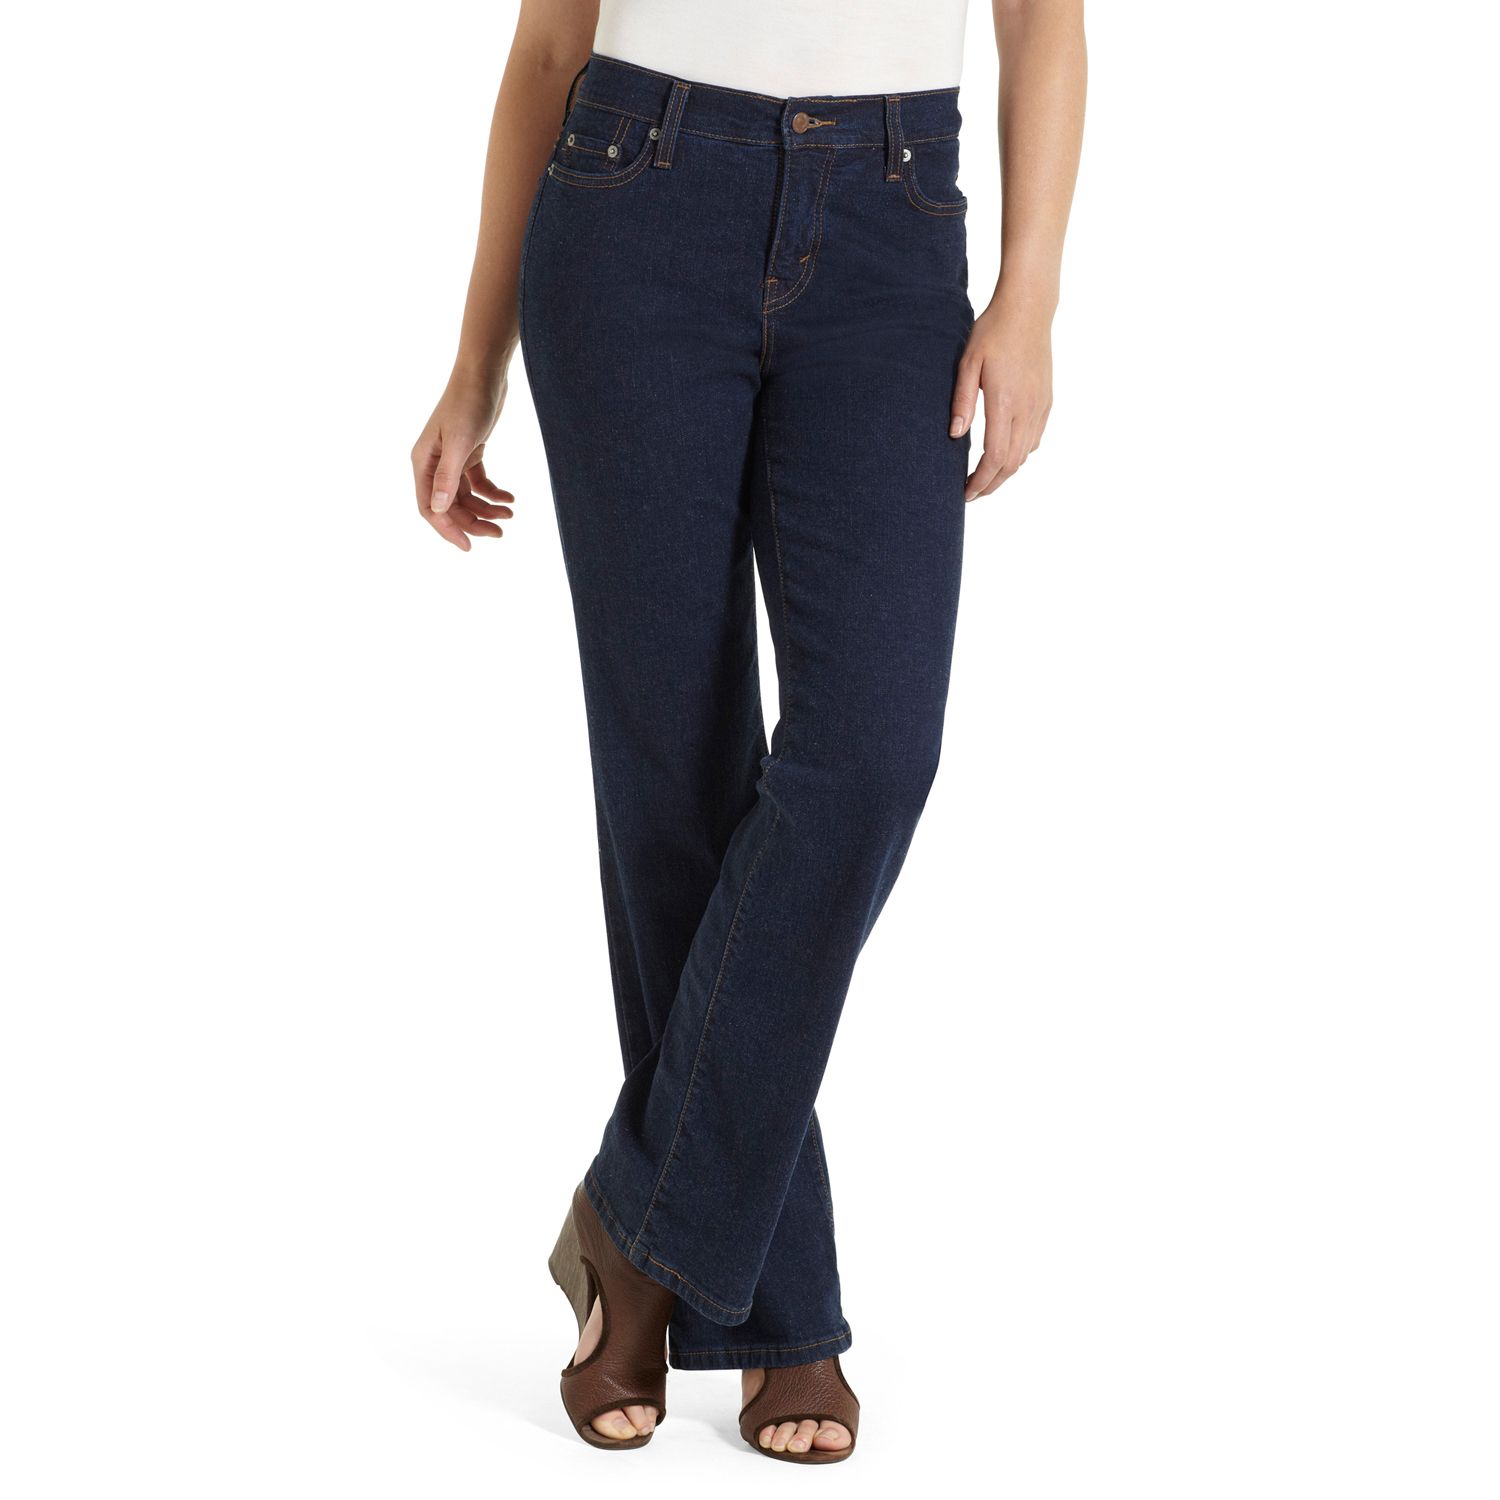 512 Perfectly Slimming Bootcut Jeans